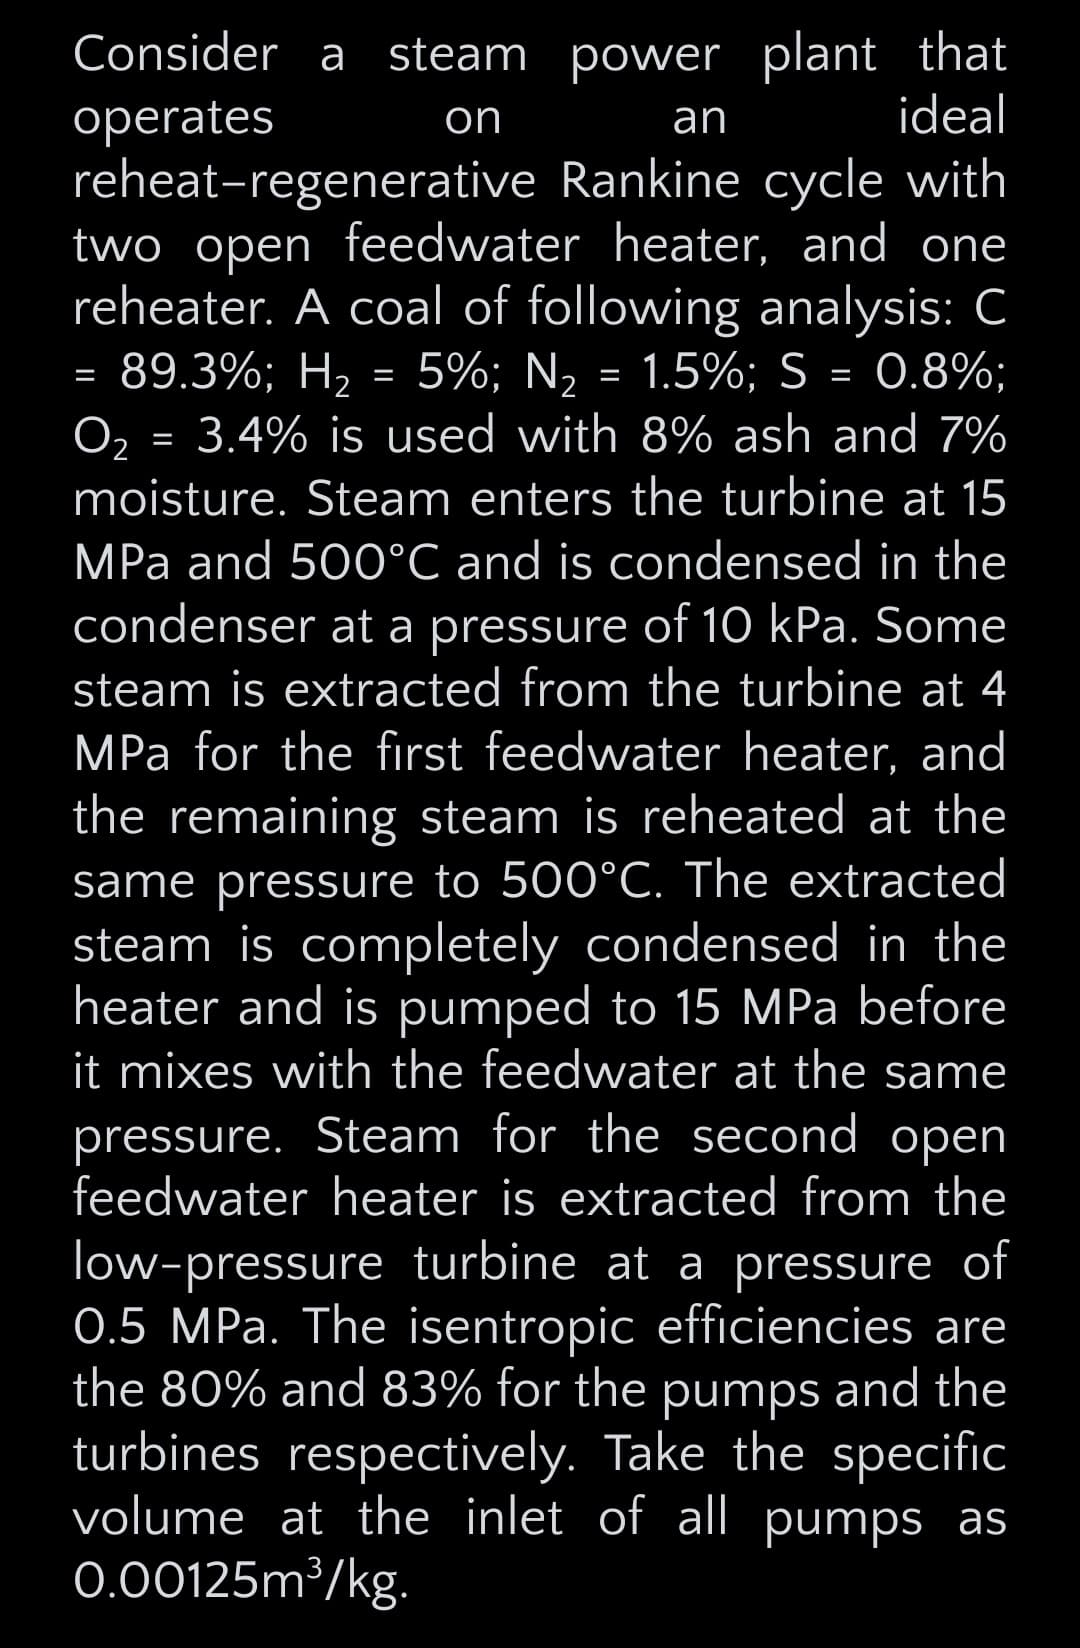 Consider a steam power plant that
operates
on
an
ideal
reheat-regenerative Rankine cycle with
two open feedwater heater, and one
reheater. A coal of following analysis: C
=
O2
89.3%; H2
=
=
5%; N₂
=
1.5%; S = 0.8%;
3.4% is used with 8% ash and 7%
moisture. Steam enters the turbine at 15
MPa and 500°C and is condensed in the
condenser at a pressure of 10 kPa. Some
steam is extracted from the turbine at 4
MPa for the first feedwater heater, and
the remaining steam is reheated at the
same pressure to 500°C. The extracted
steam is completely condensed in the
heater and is pumped to 15 MPa before
it mixes with the feedwater at the same
pressure. Steam for the second open
feedwater heater is extracted from the
low-pressure turbine at a pressure of
0.5 MPa. The isentropic efficiencies are
the 80% and 83% for the pumps and the
turbines respectively. Take the specific
volume at the inlet of all pumps as
0.00125m³/kg.